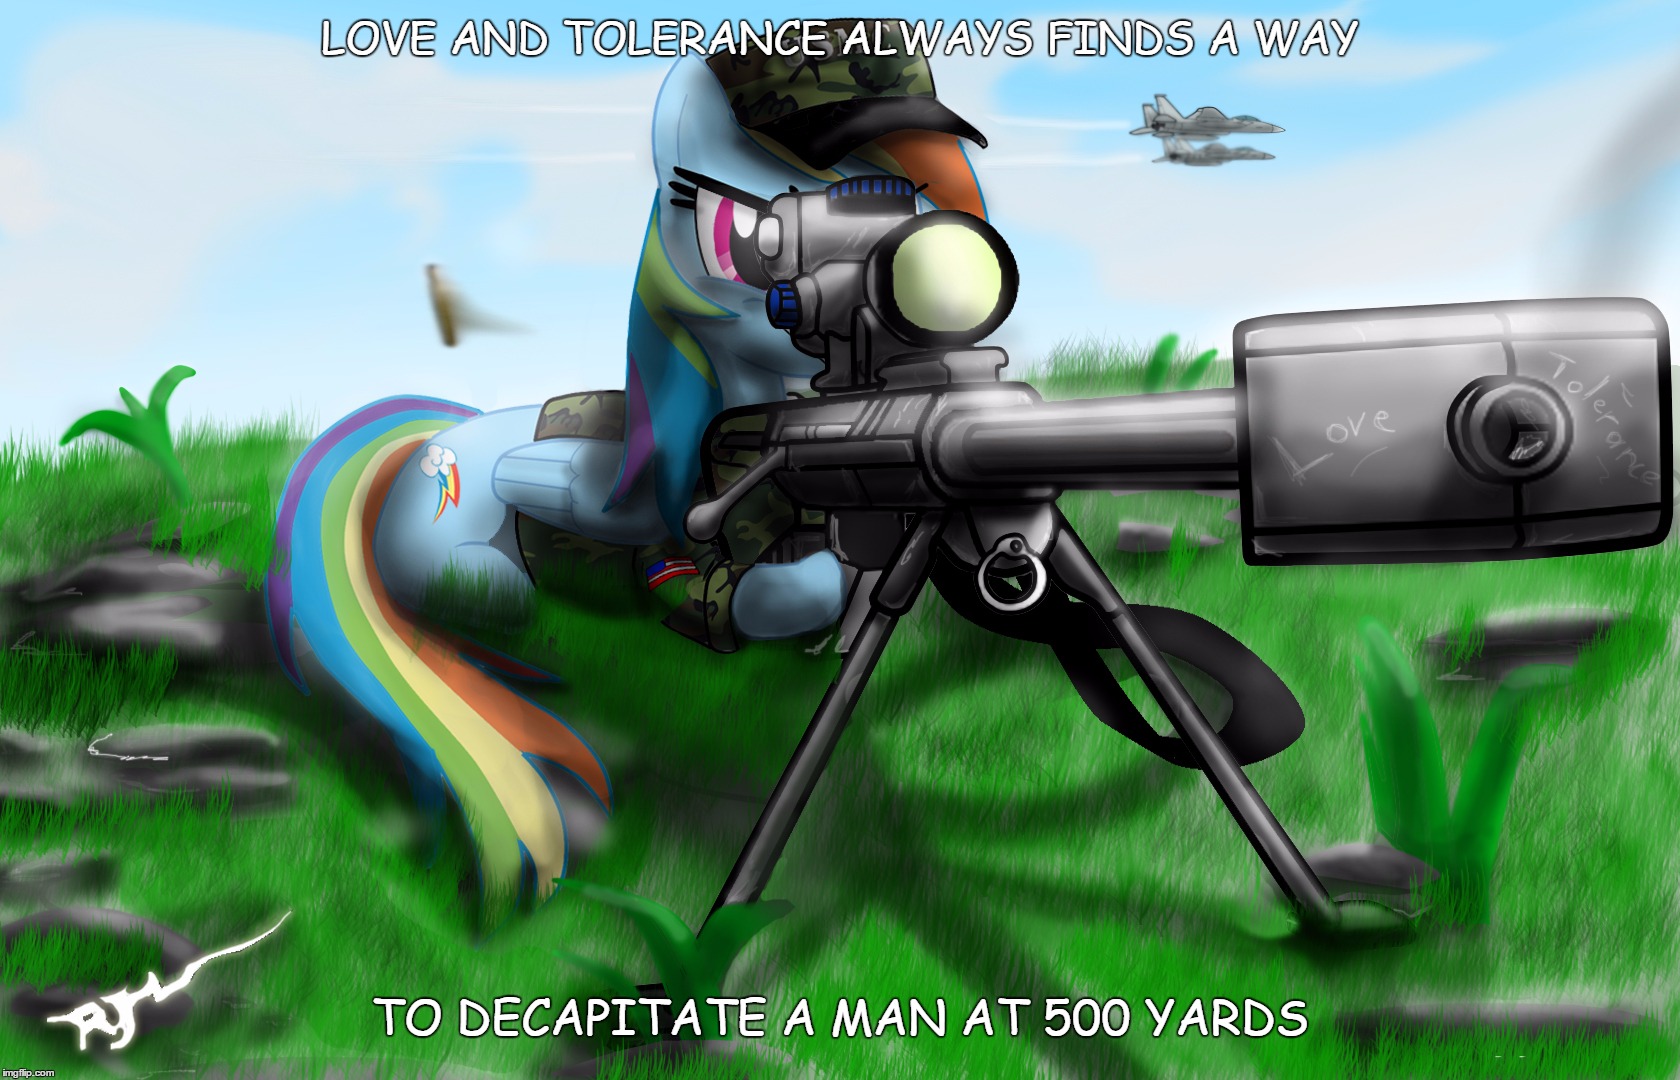 LOVE AND TOLERANCE ALWAYS FINDS A WAY; TO DECAPITATE A MAN AT 500 YARDS | image tagged in love and tolerance at 500 yards | made w/ Imgflip meme maker